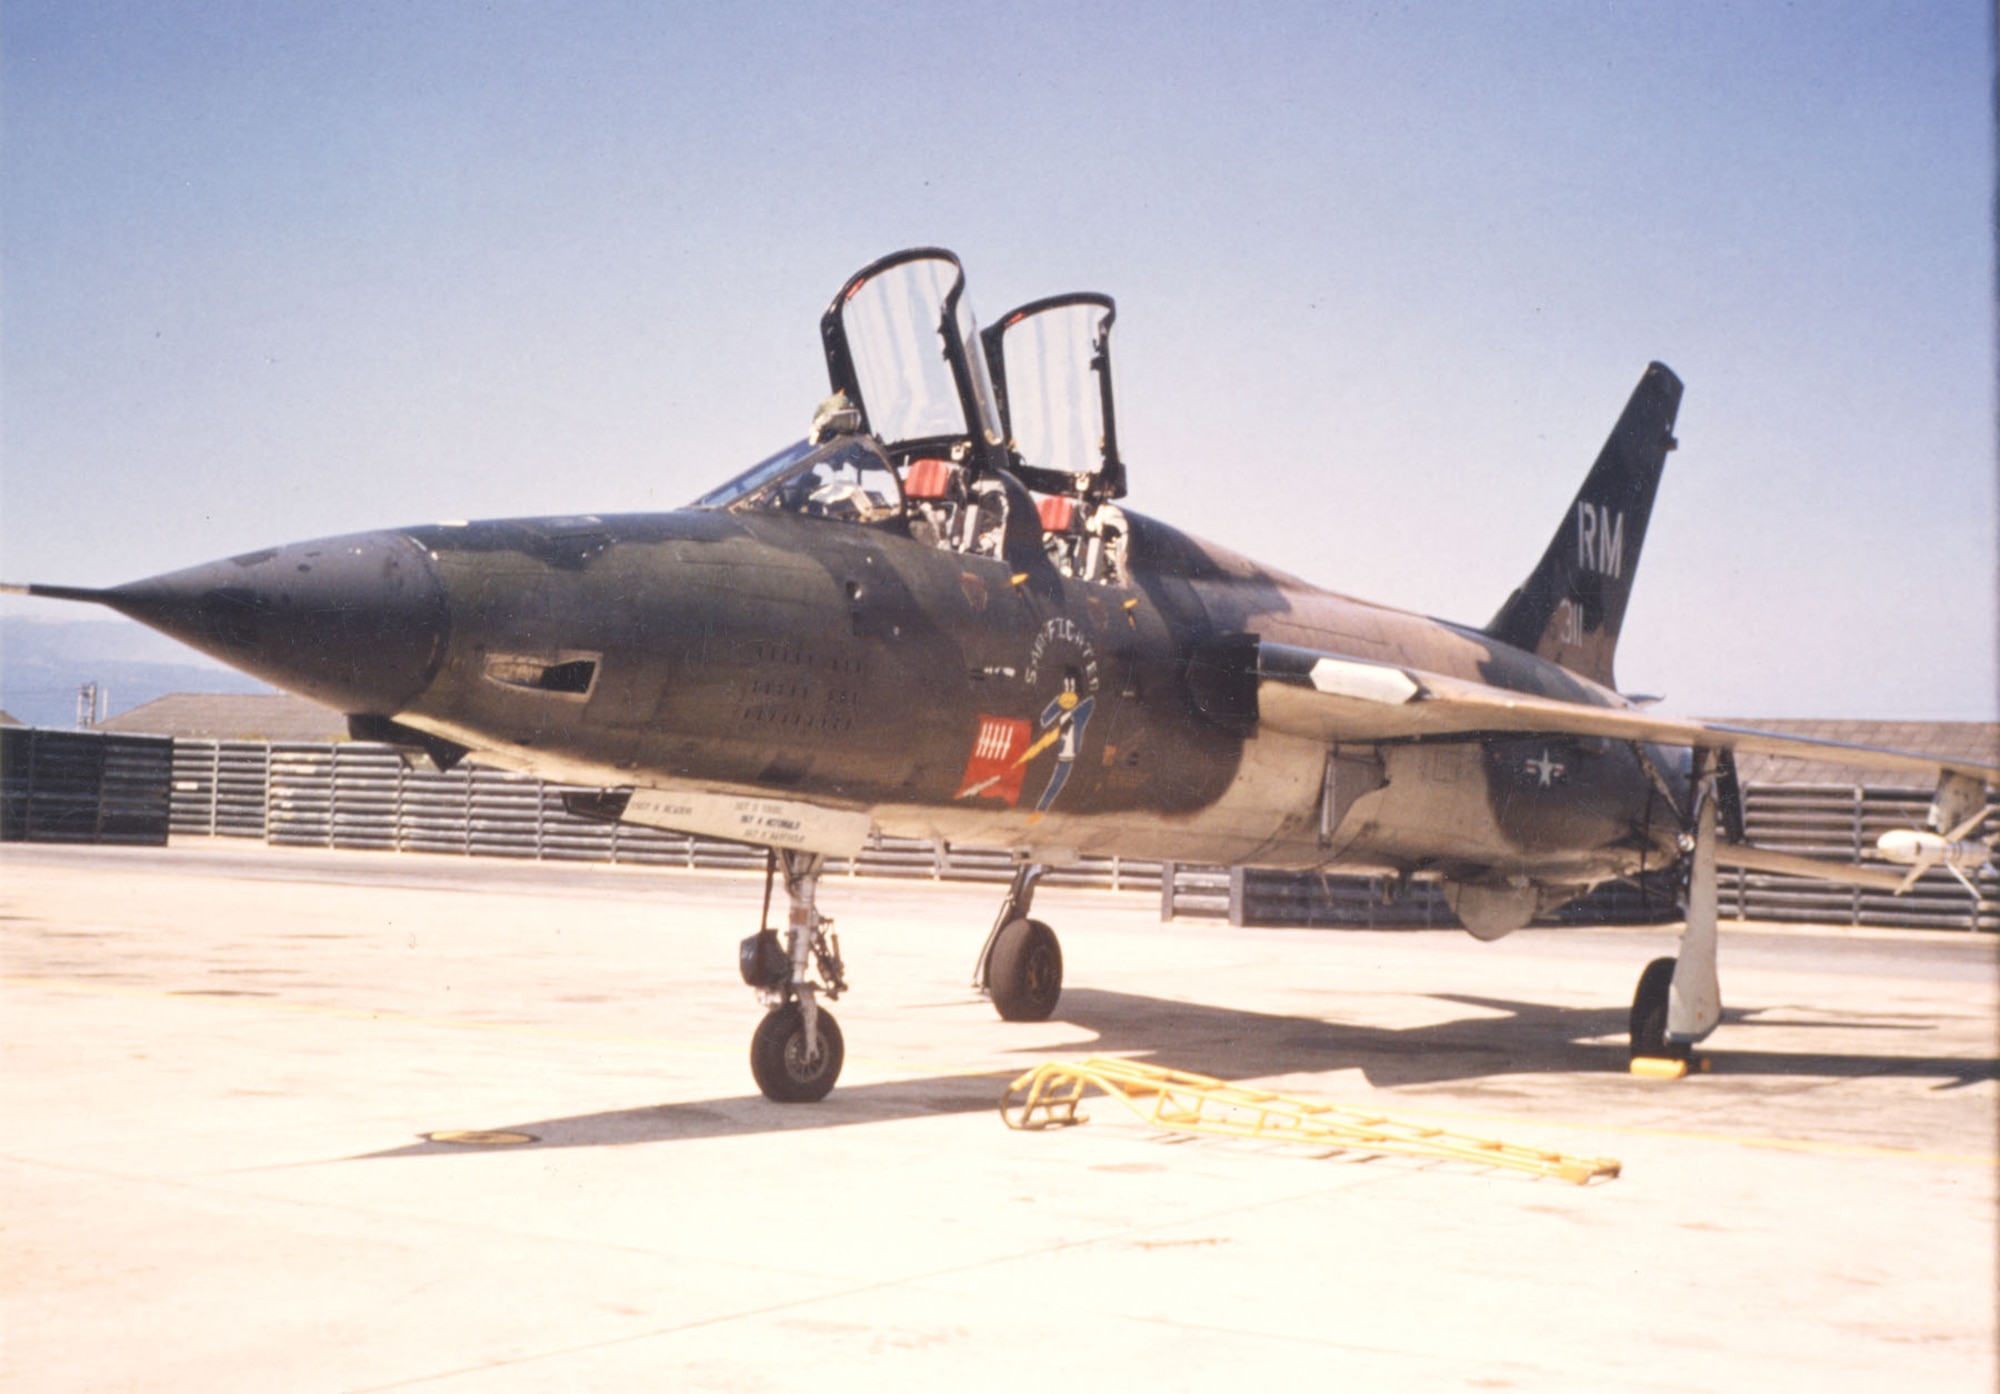 Of the 143 F-105F trainers built, 86 were converted into Wild Weasels like the one pictured here. Because of the high losses attributed to such a dangerous mission, though, there were typically fewer than a dozen aircraft available for missions at any one time. (U.S. Air Force photo)